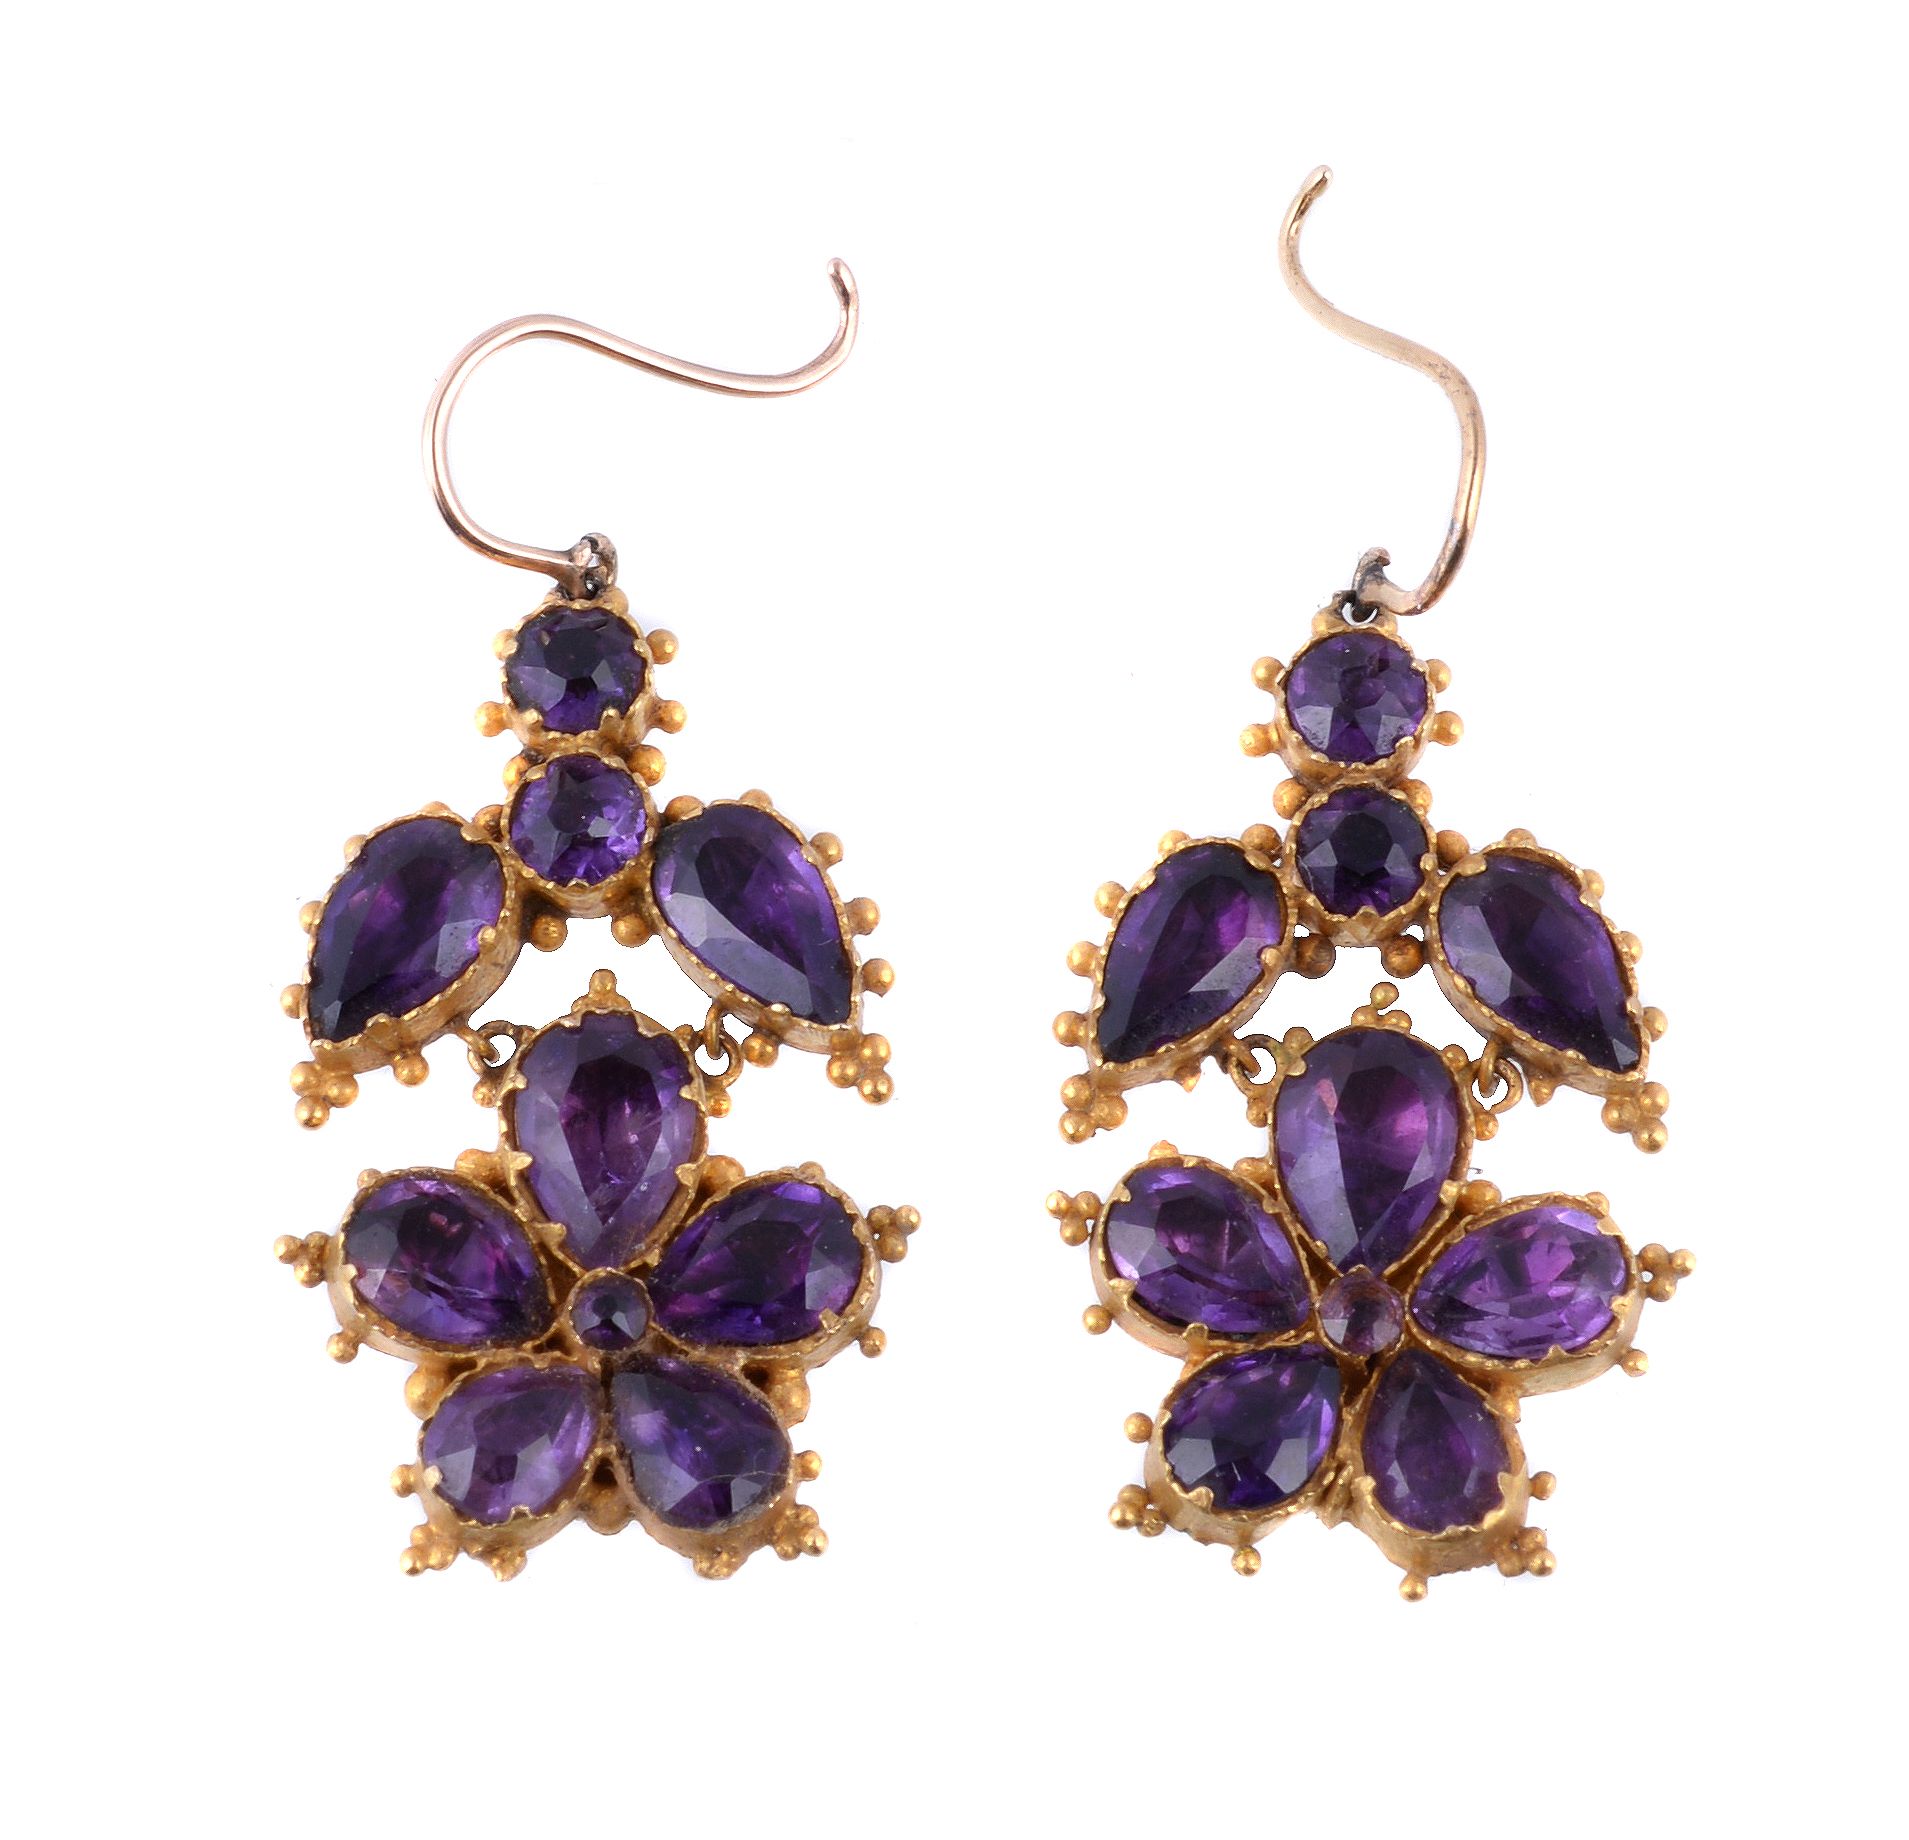 A pair of early 19th century amethyst earrings, circa 1820, designed as flower heads set with pear